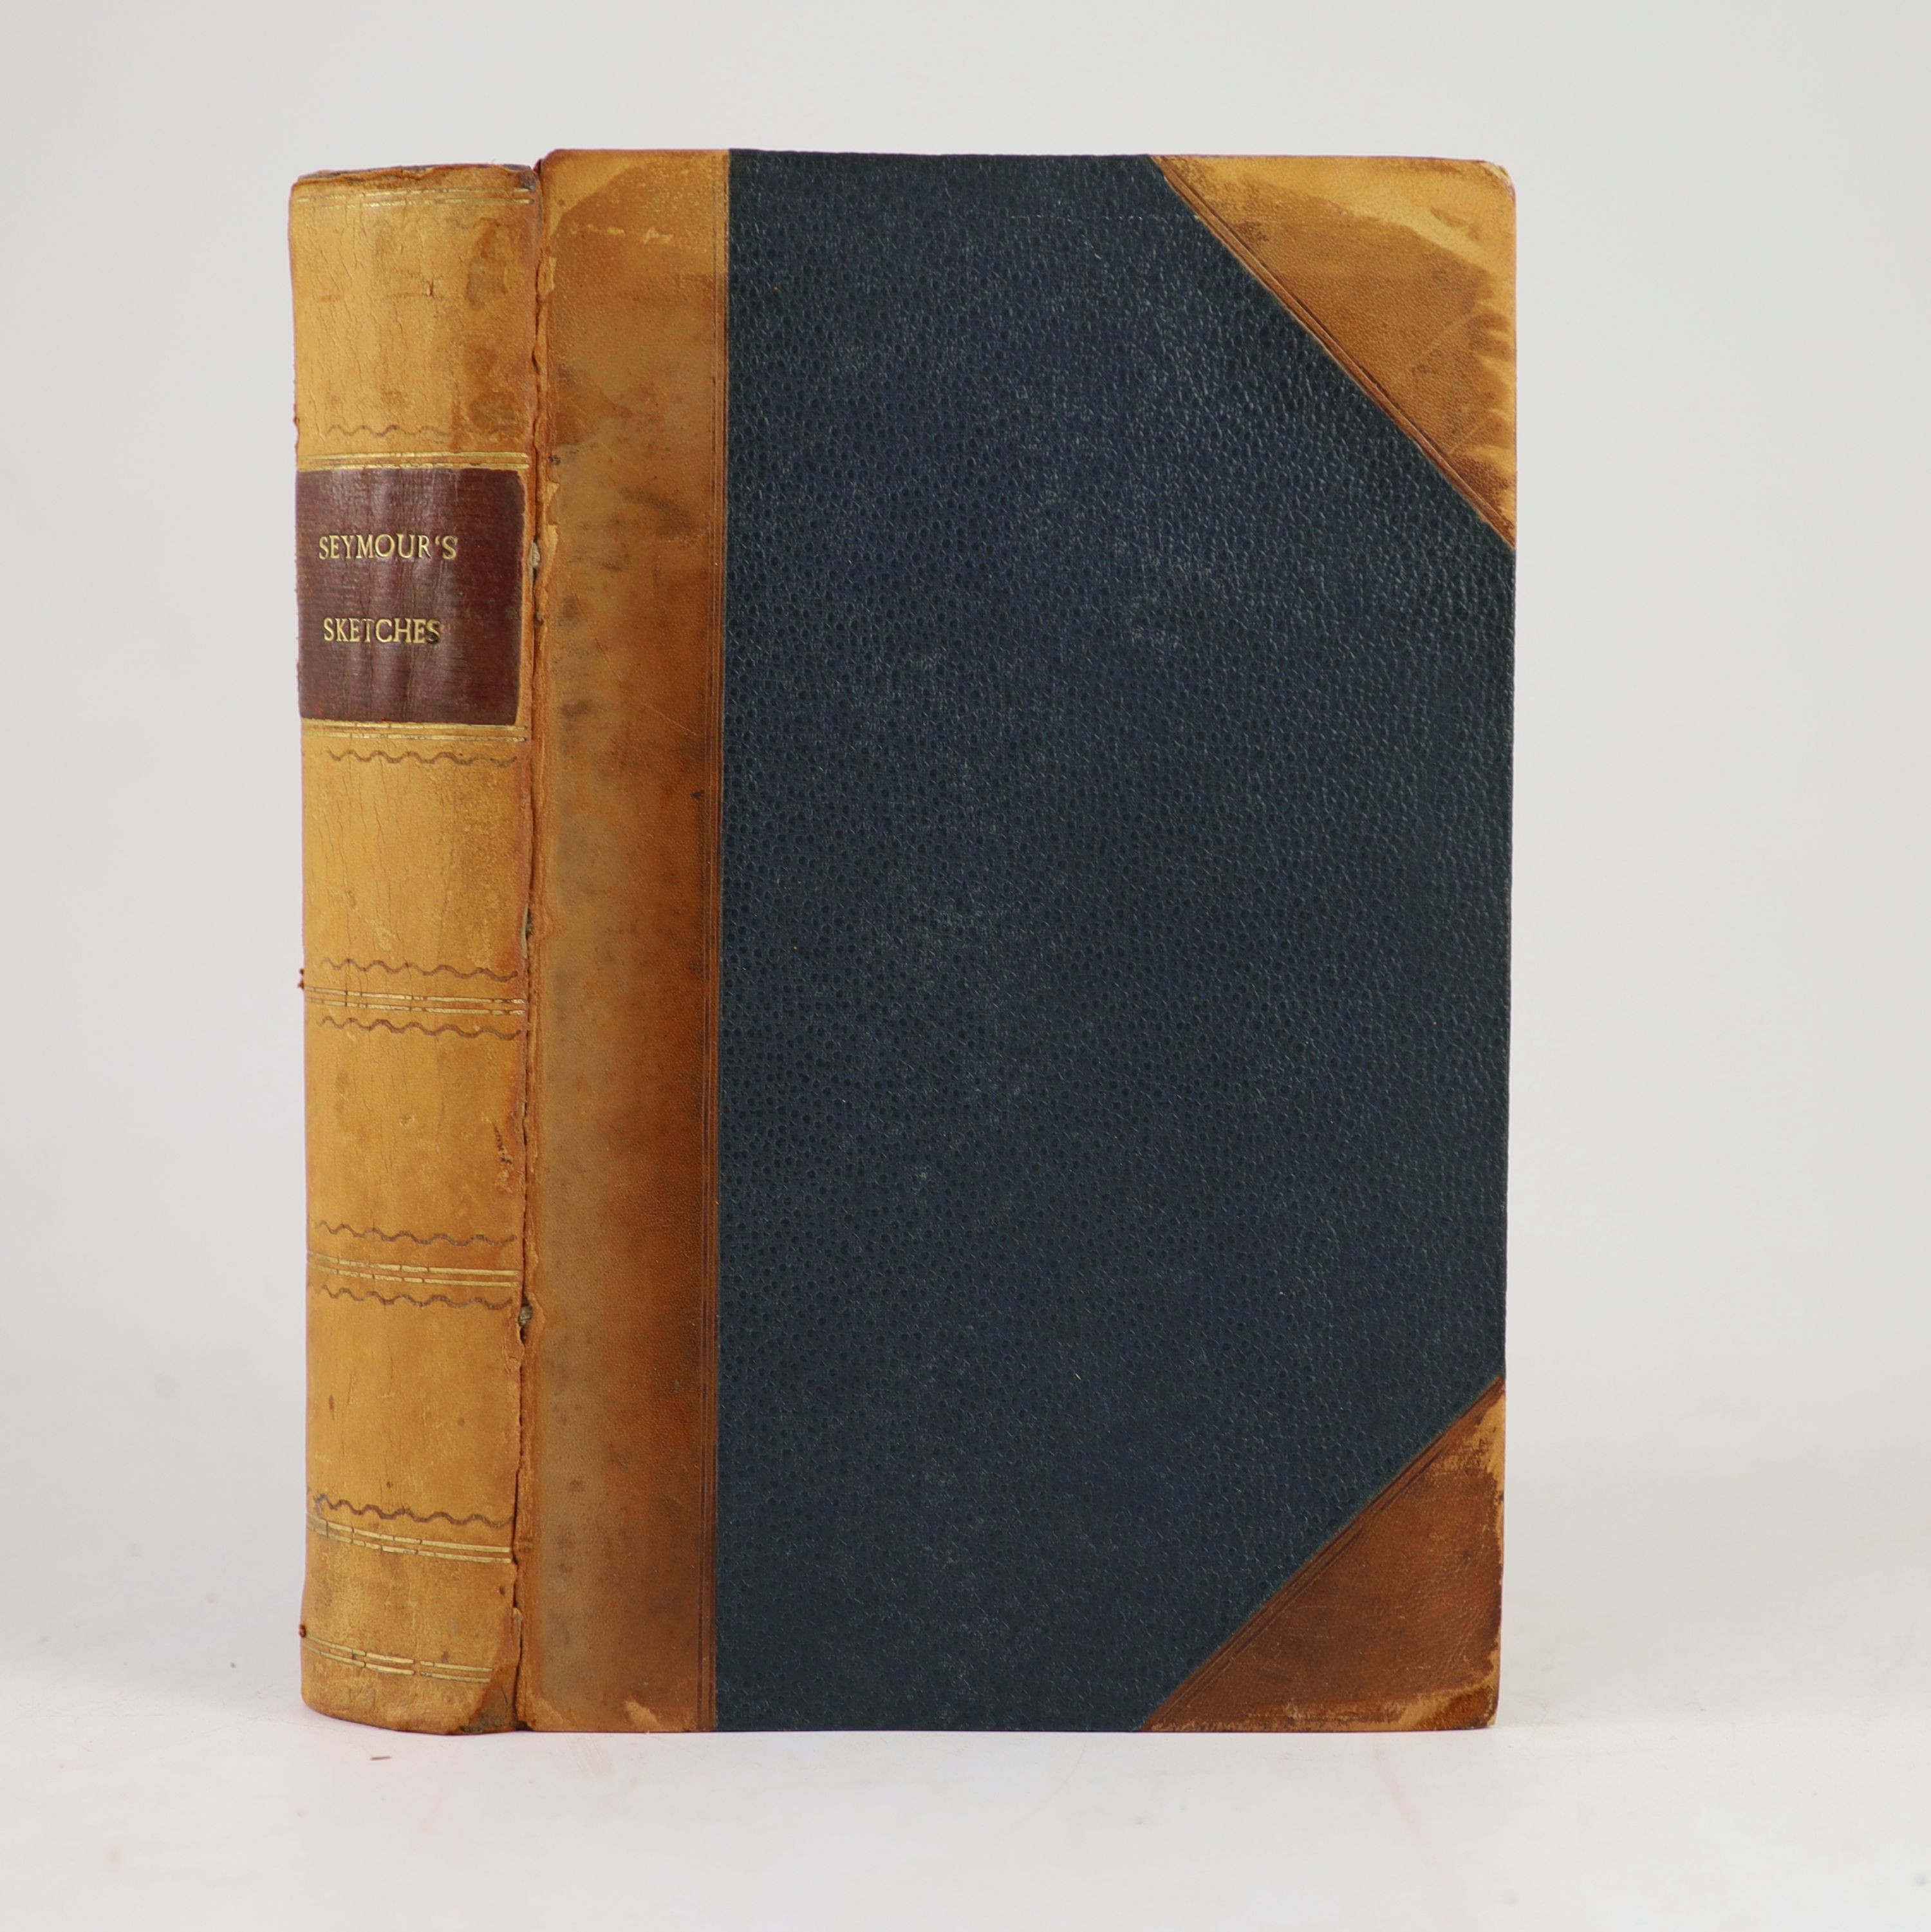 Seymour, Robert - Sketches by Seymour. 5 vols bound in 1. Complete with 180 cartoon sketch plates on variously coloured paper and an illustrated volume title page to each section. Half calf and pebbled cloth, tooled and